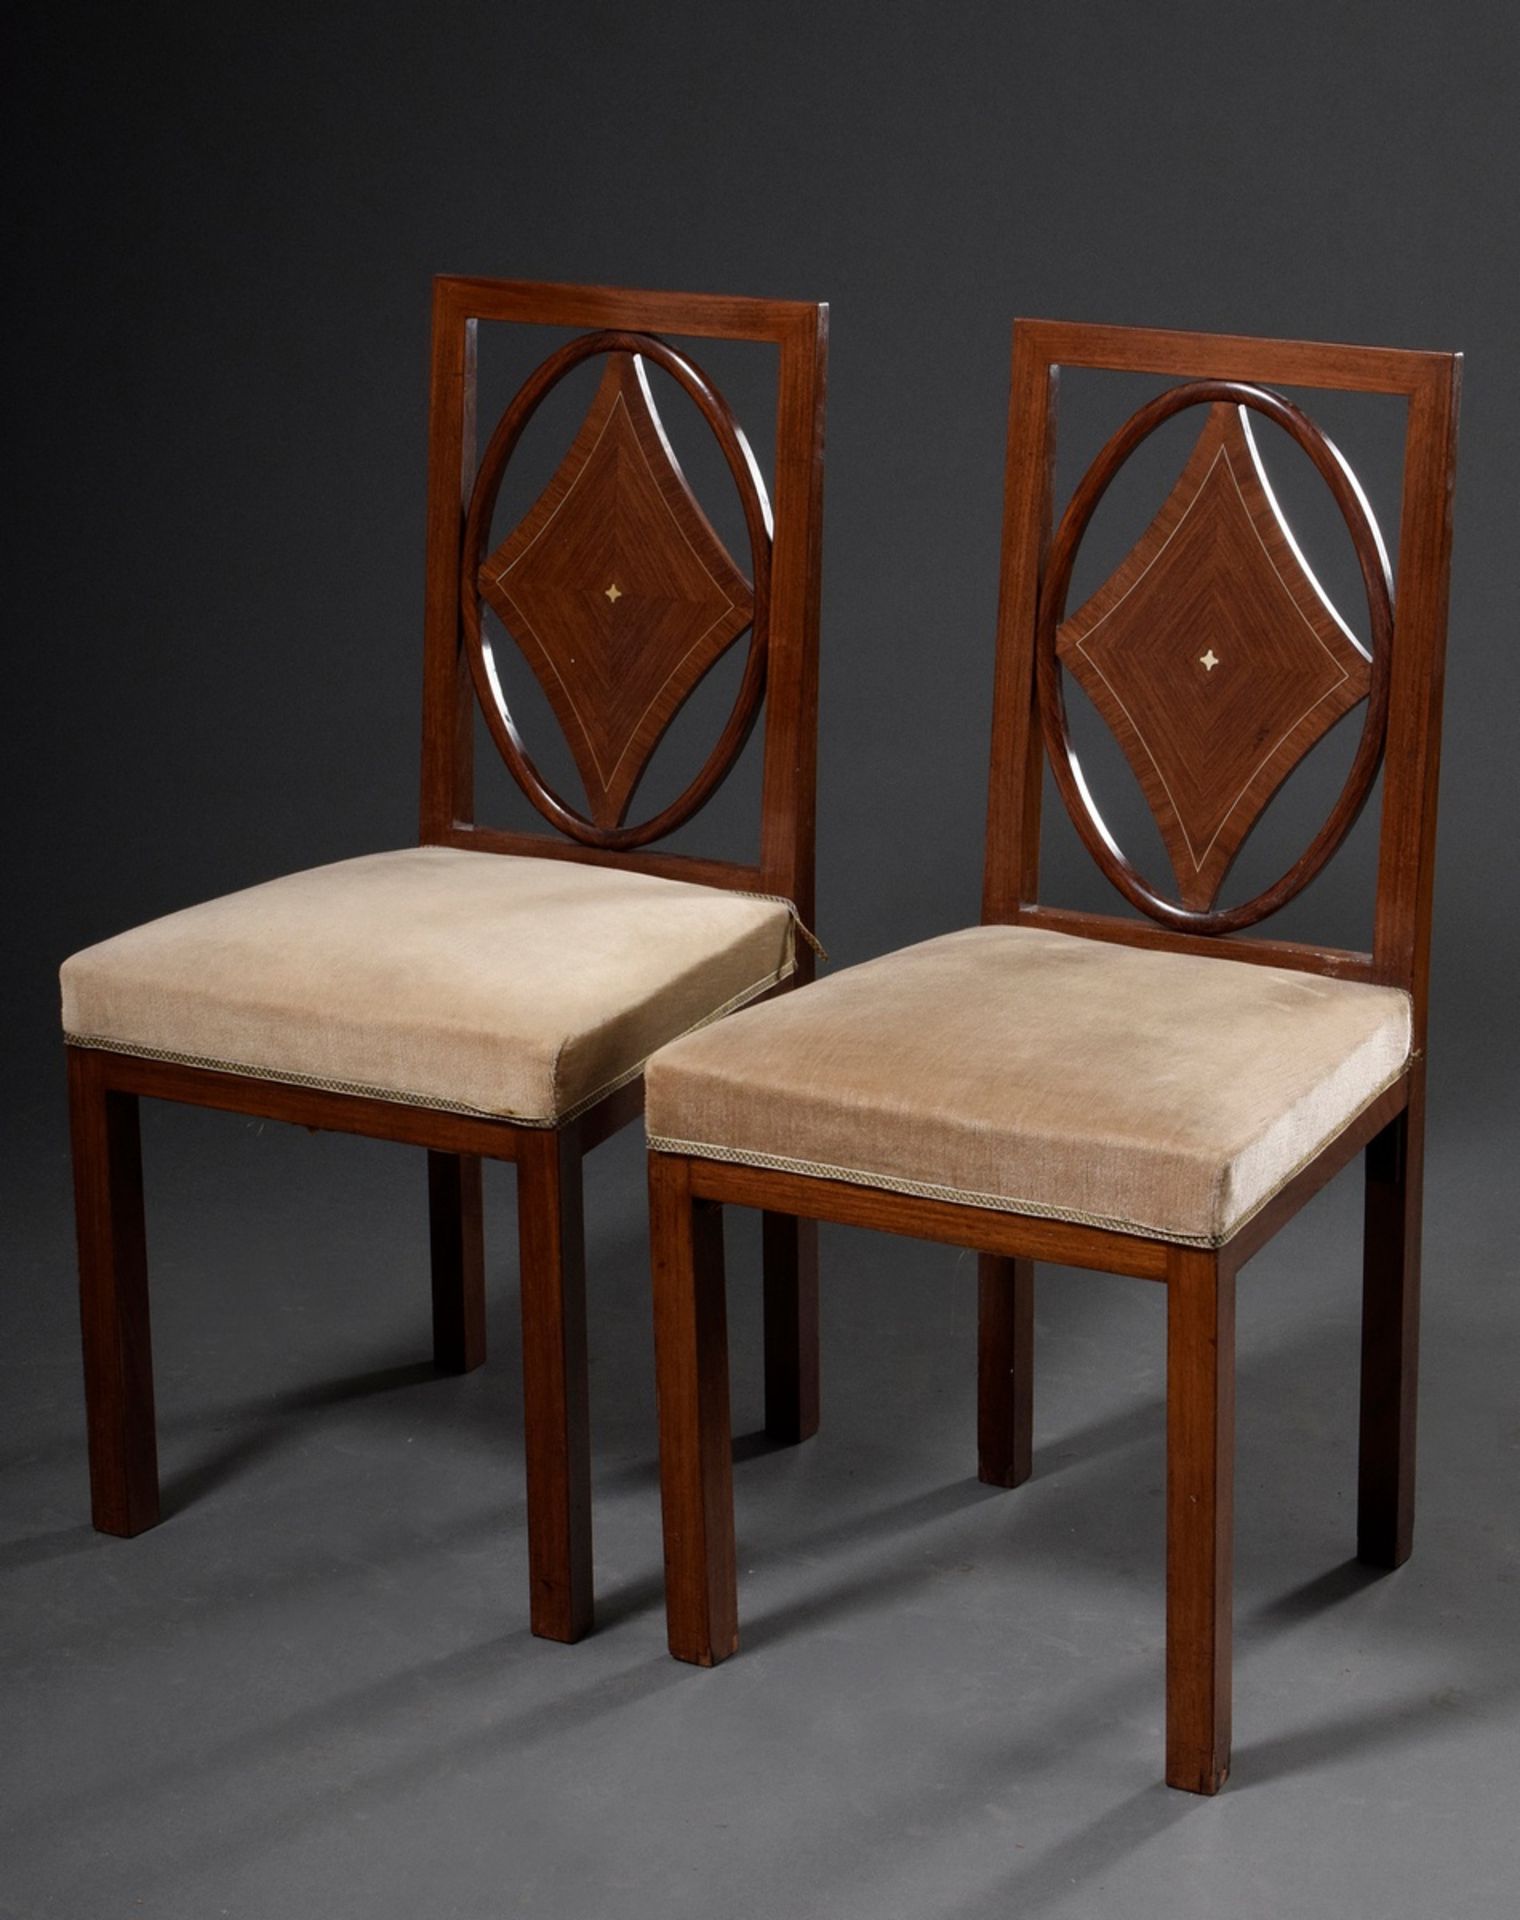 2 Art Deco chairs with oval framing and diamond motif in the backrest, Bruno Paul circle, rosewood 